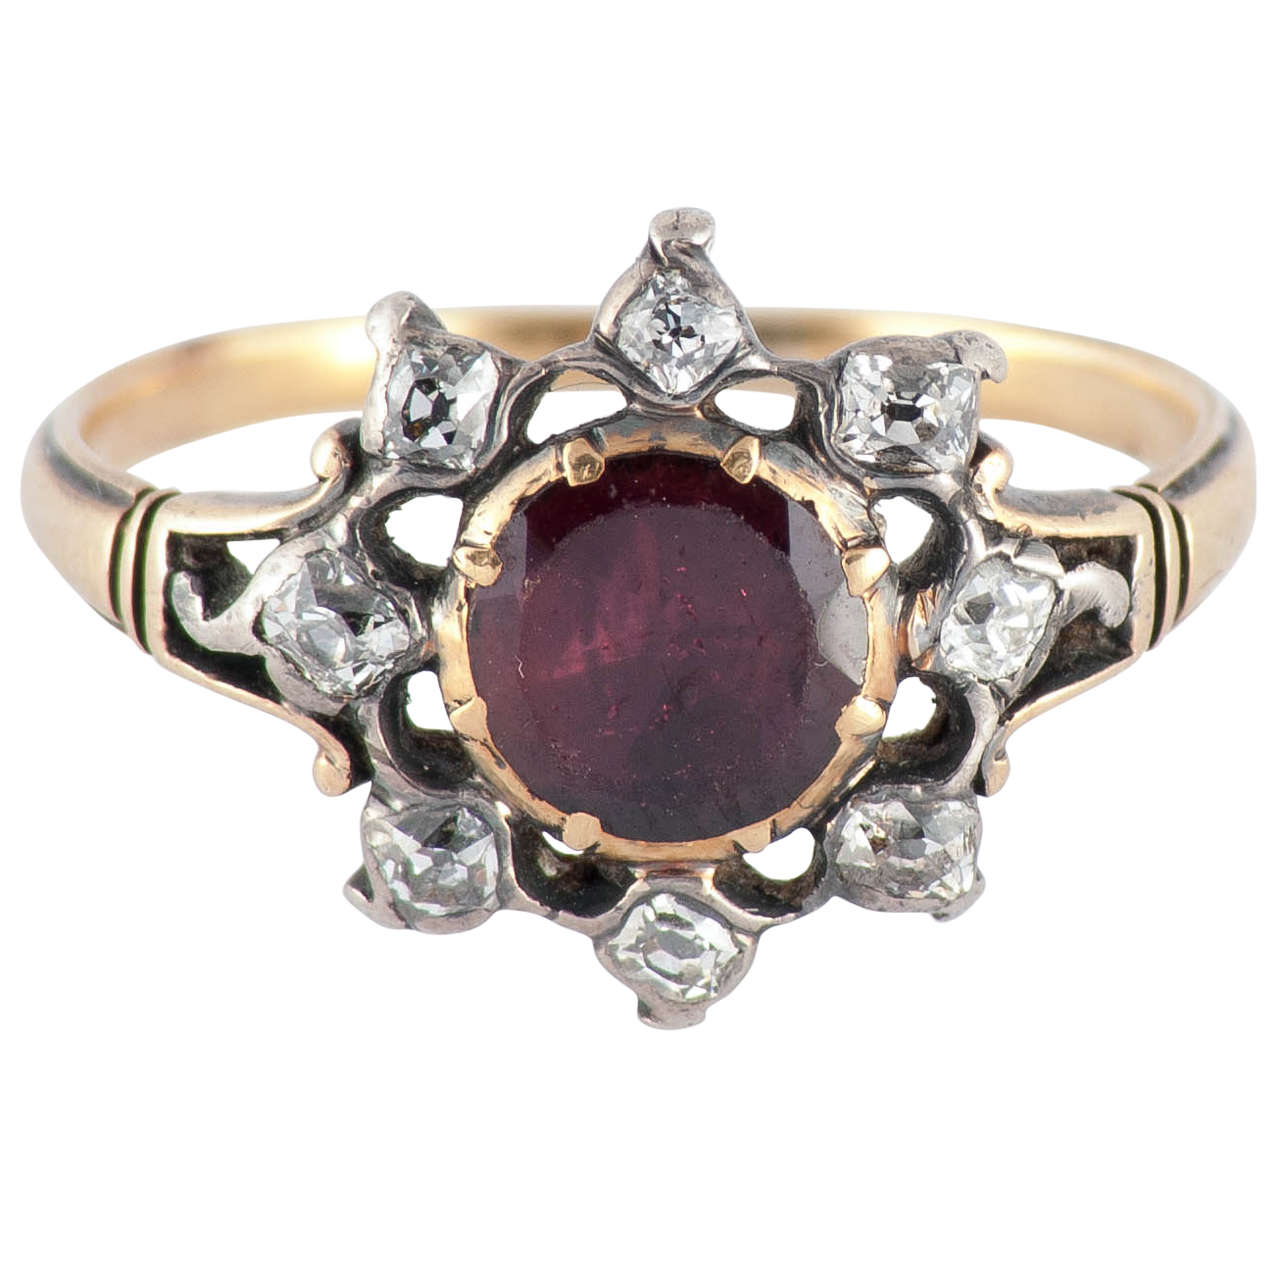 Sparkling Georgian almondine garnet cluster ring surrounded by eight cushion cut diamonds in a starburst design set in 15K yellow gold and silver. Lovely to wear day or night. The ring is a size 6 1/2 and measures 9/16